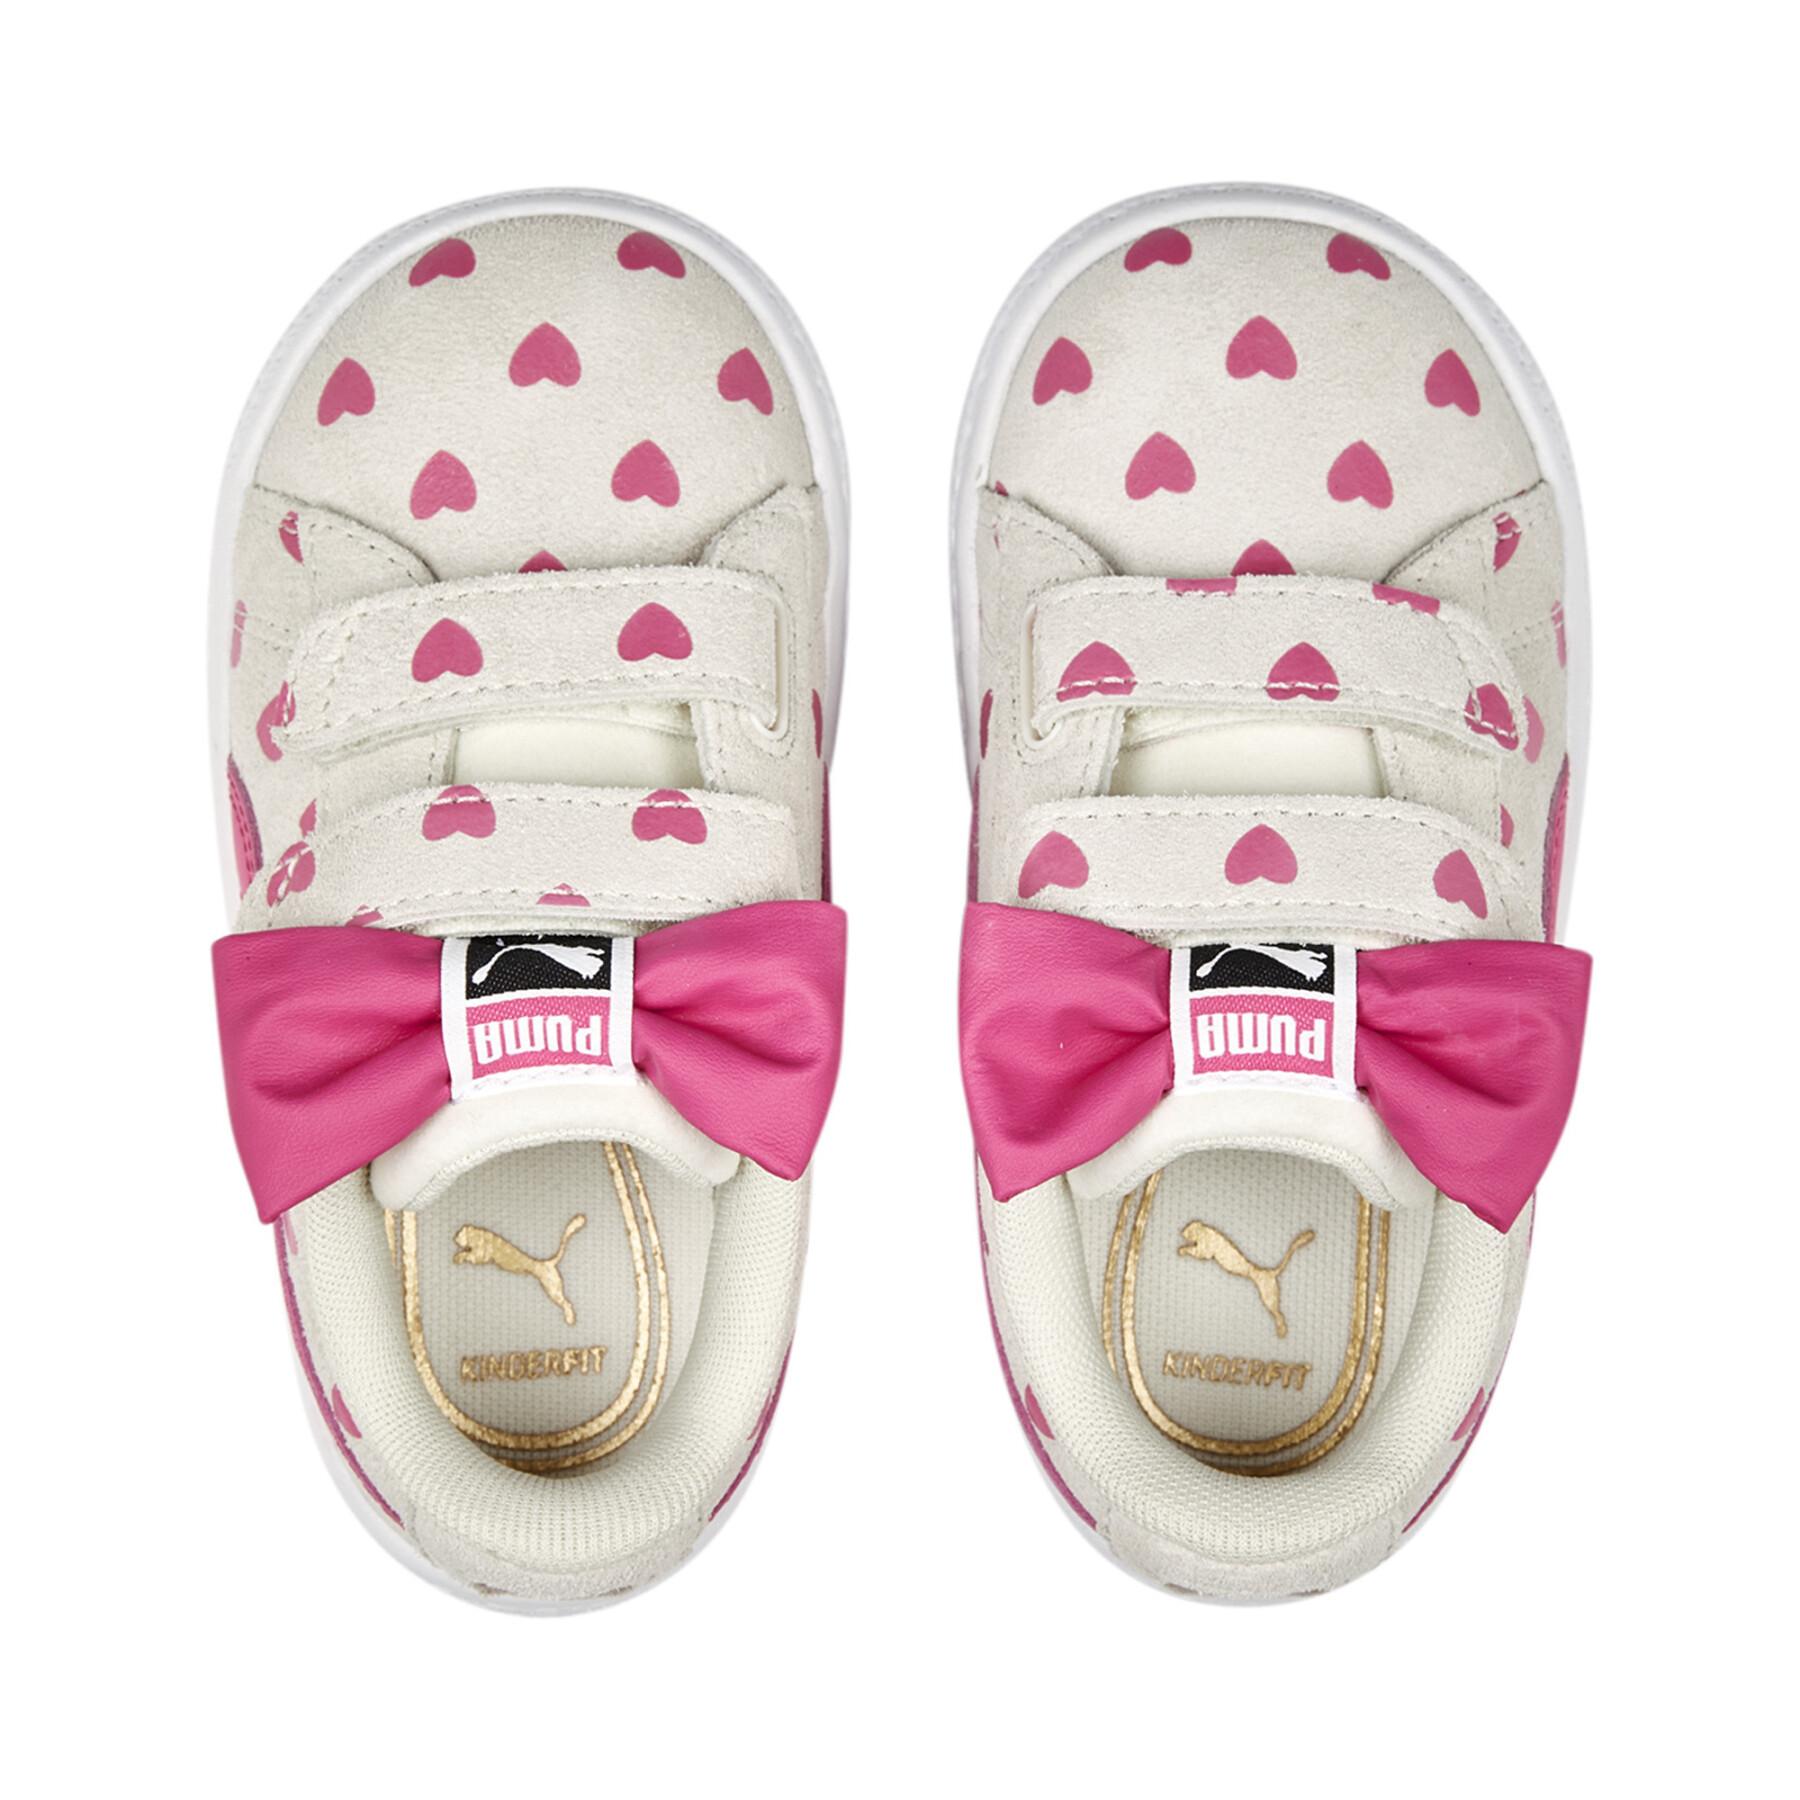 Baby girl suede sneakers Puma Classic LF Re-Bow V